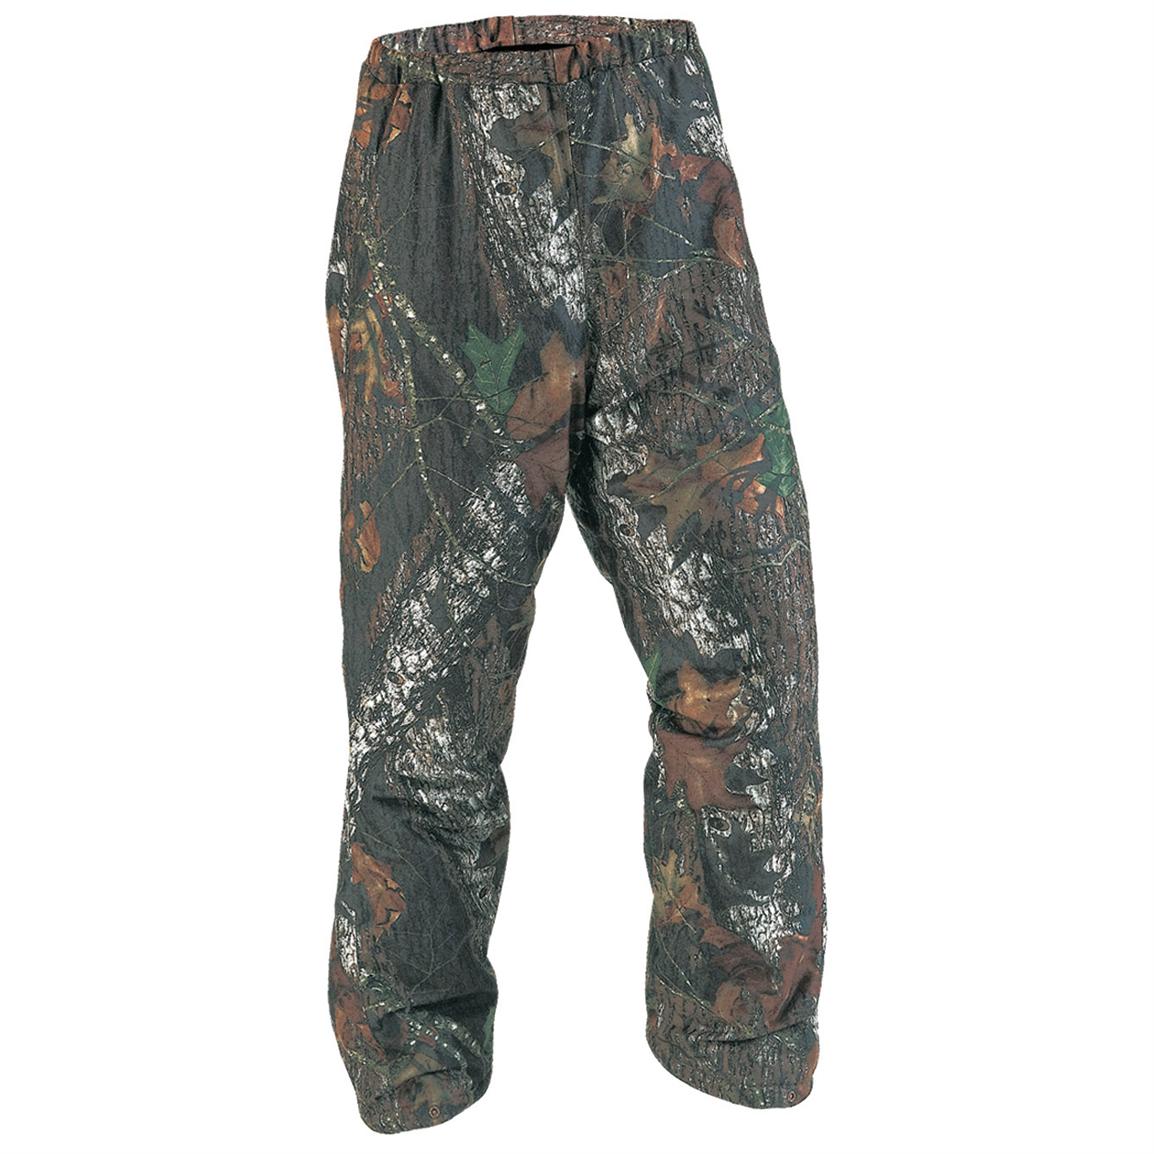 Mad Dog® Insulated Growler Pants - 109309, Camo Pants at Sportsman's Guide